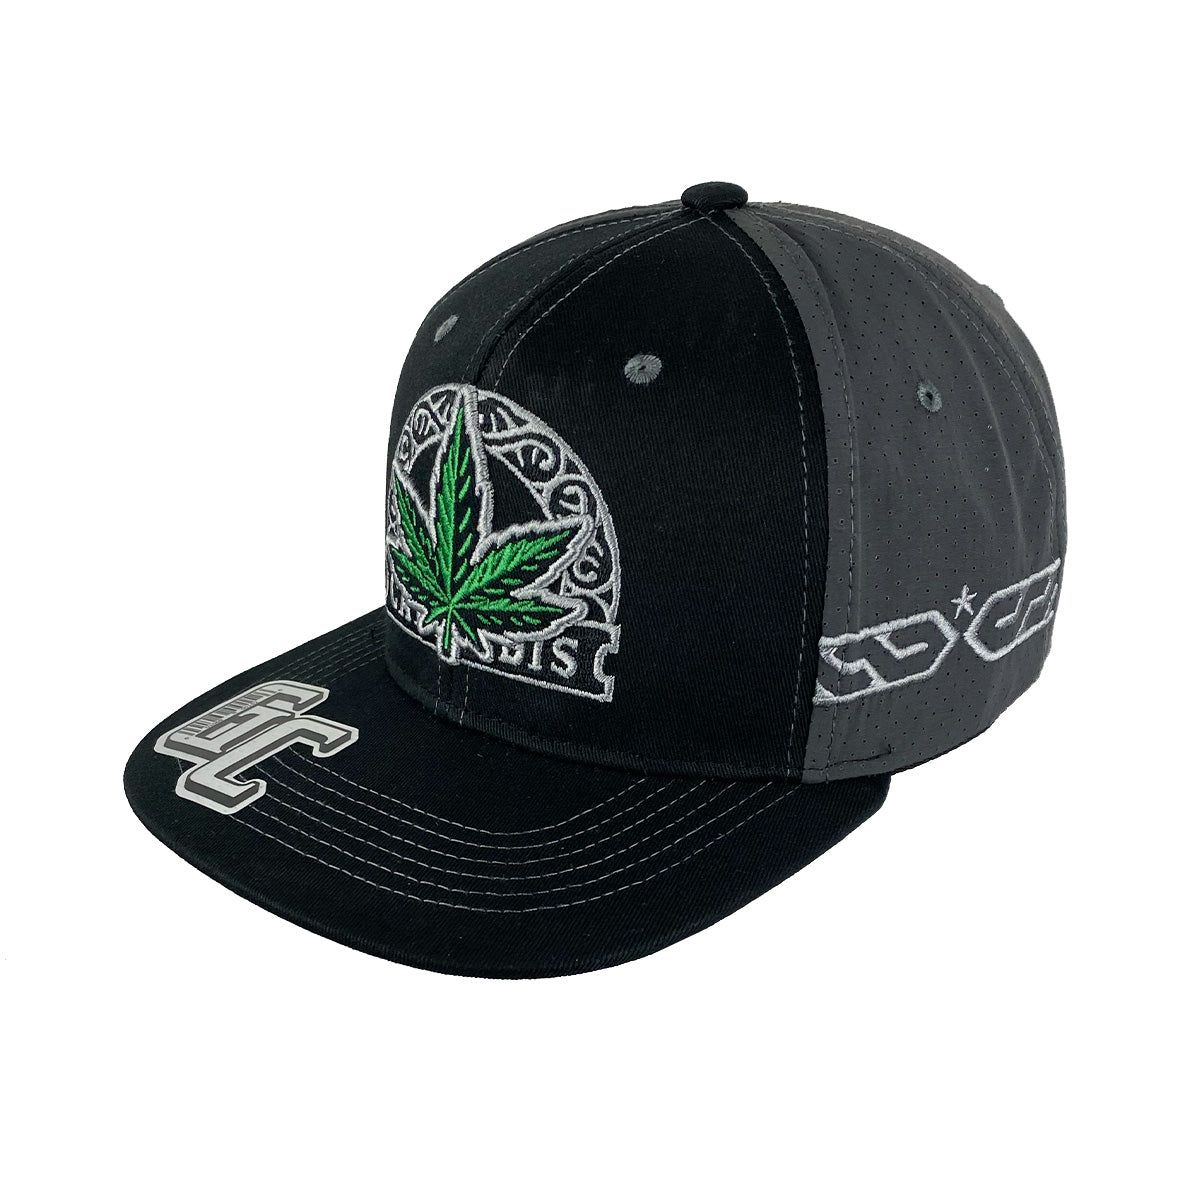 Snapback "Cannabis" Hat Embroidered